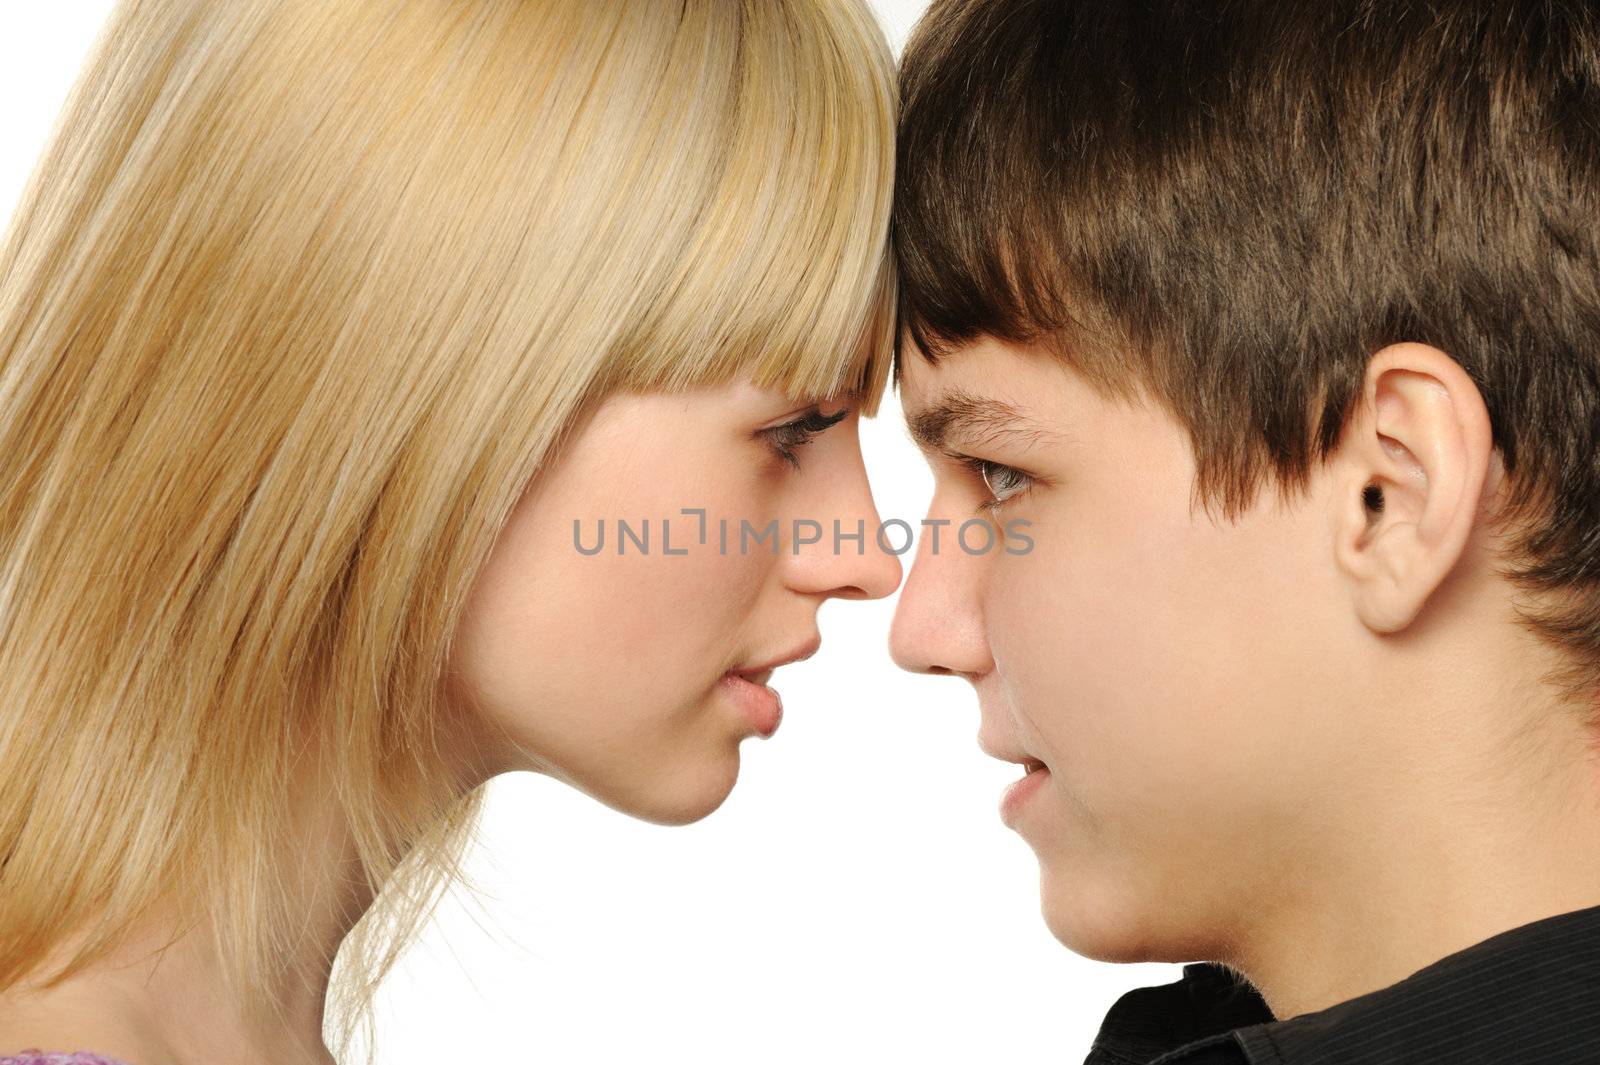 Young enamoured pair. It is isolated on a white background